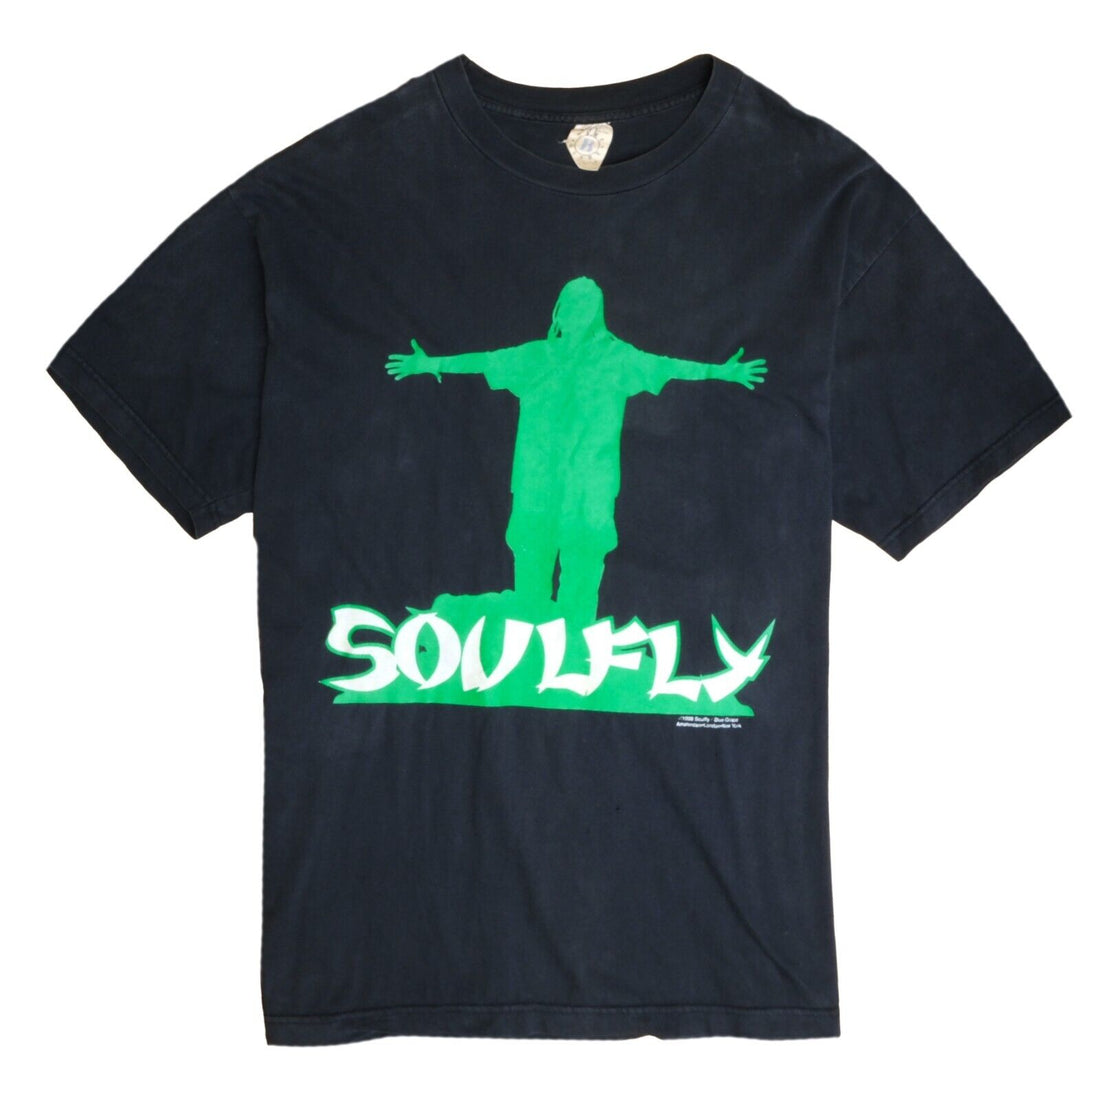 Vintage Soulfly T-Shirt Size Large Black Band Tee 1998 90s